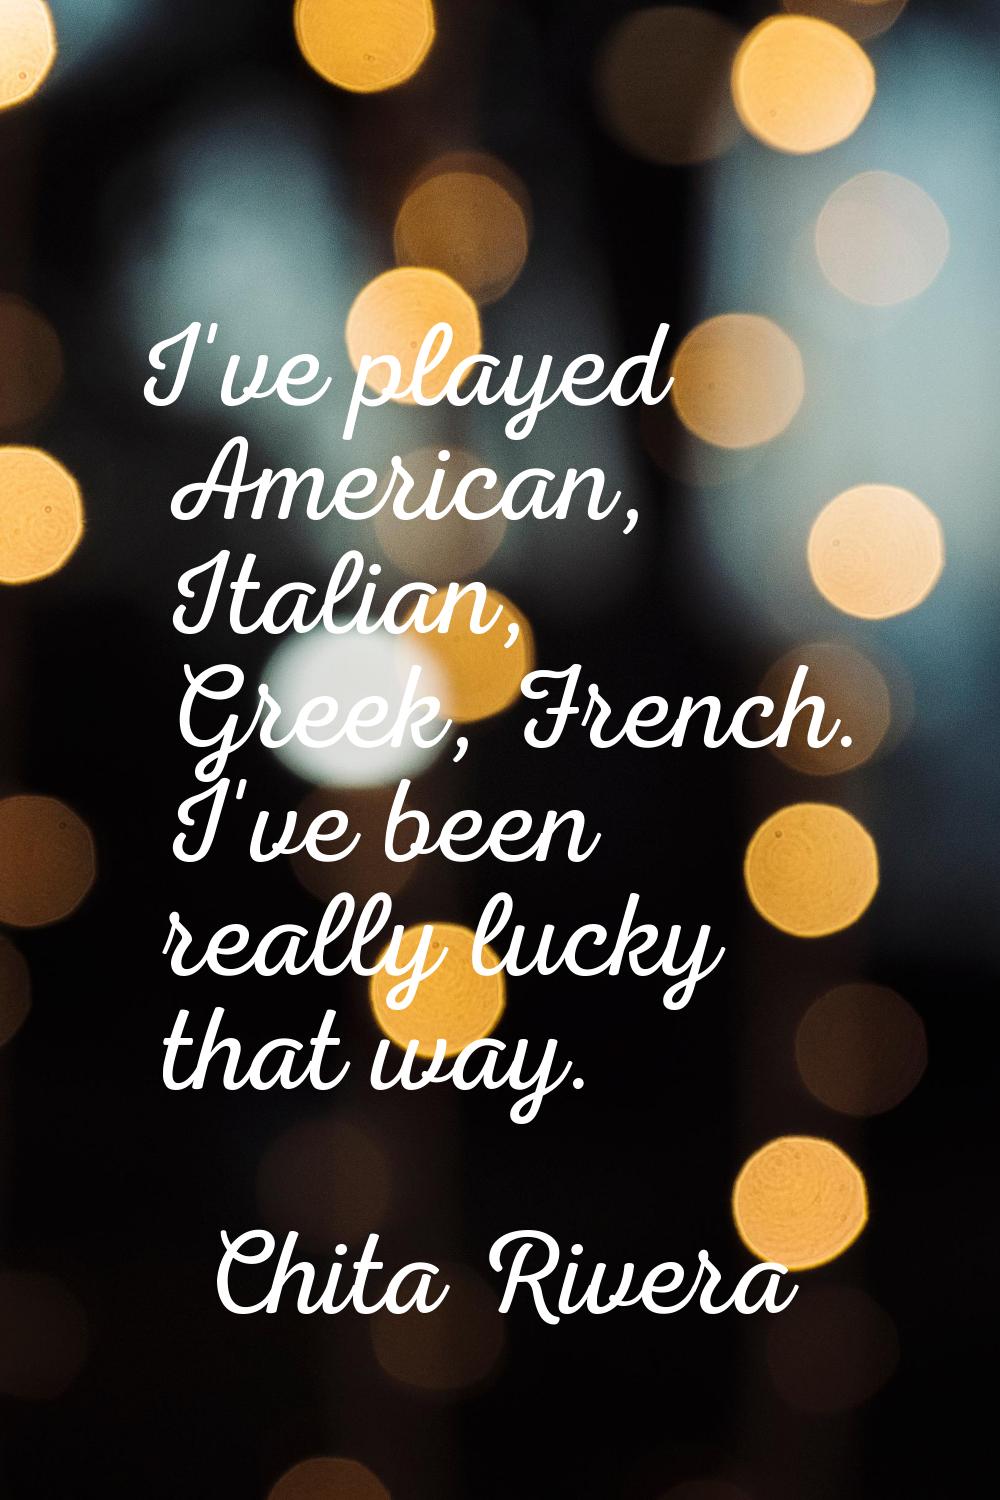 I've played American, Italian, Greek, French. I've been really lucky that way.